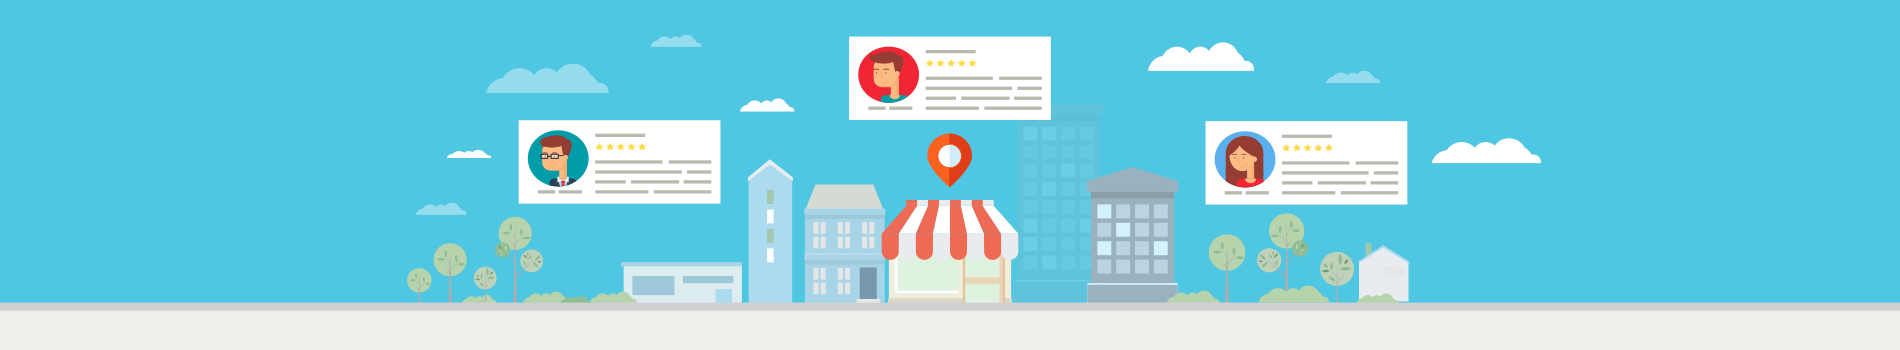 The Importance of Responding to Reviews for Your Small Business